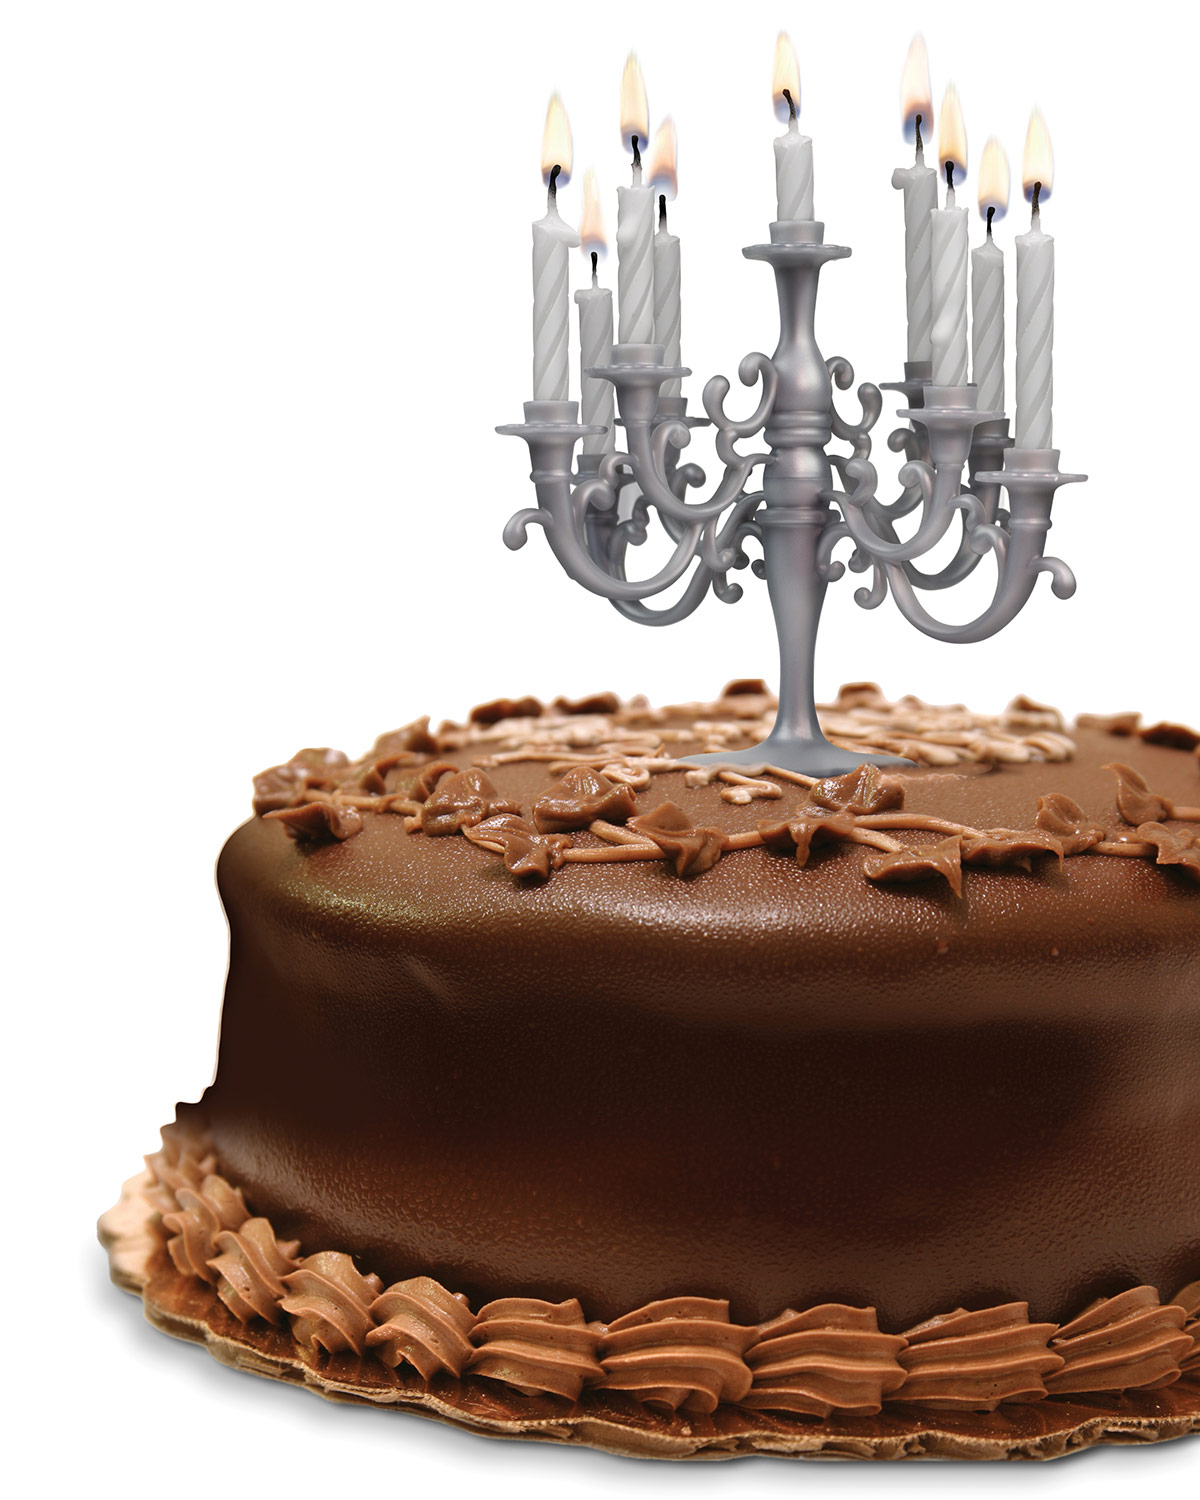 6.566 Fancy That 5228997 Cake Candelabra Birthday Holder with 9 Candles Assort